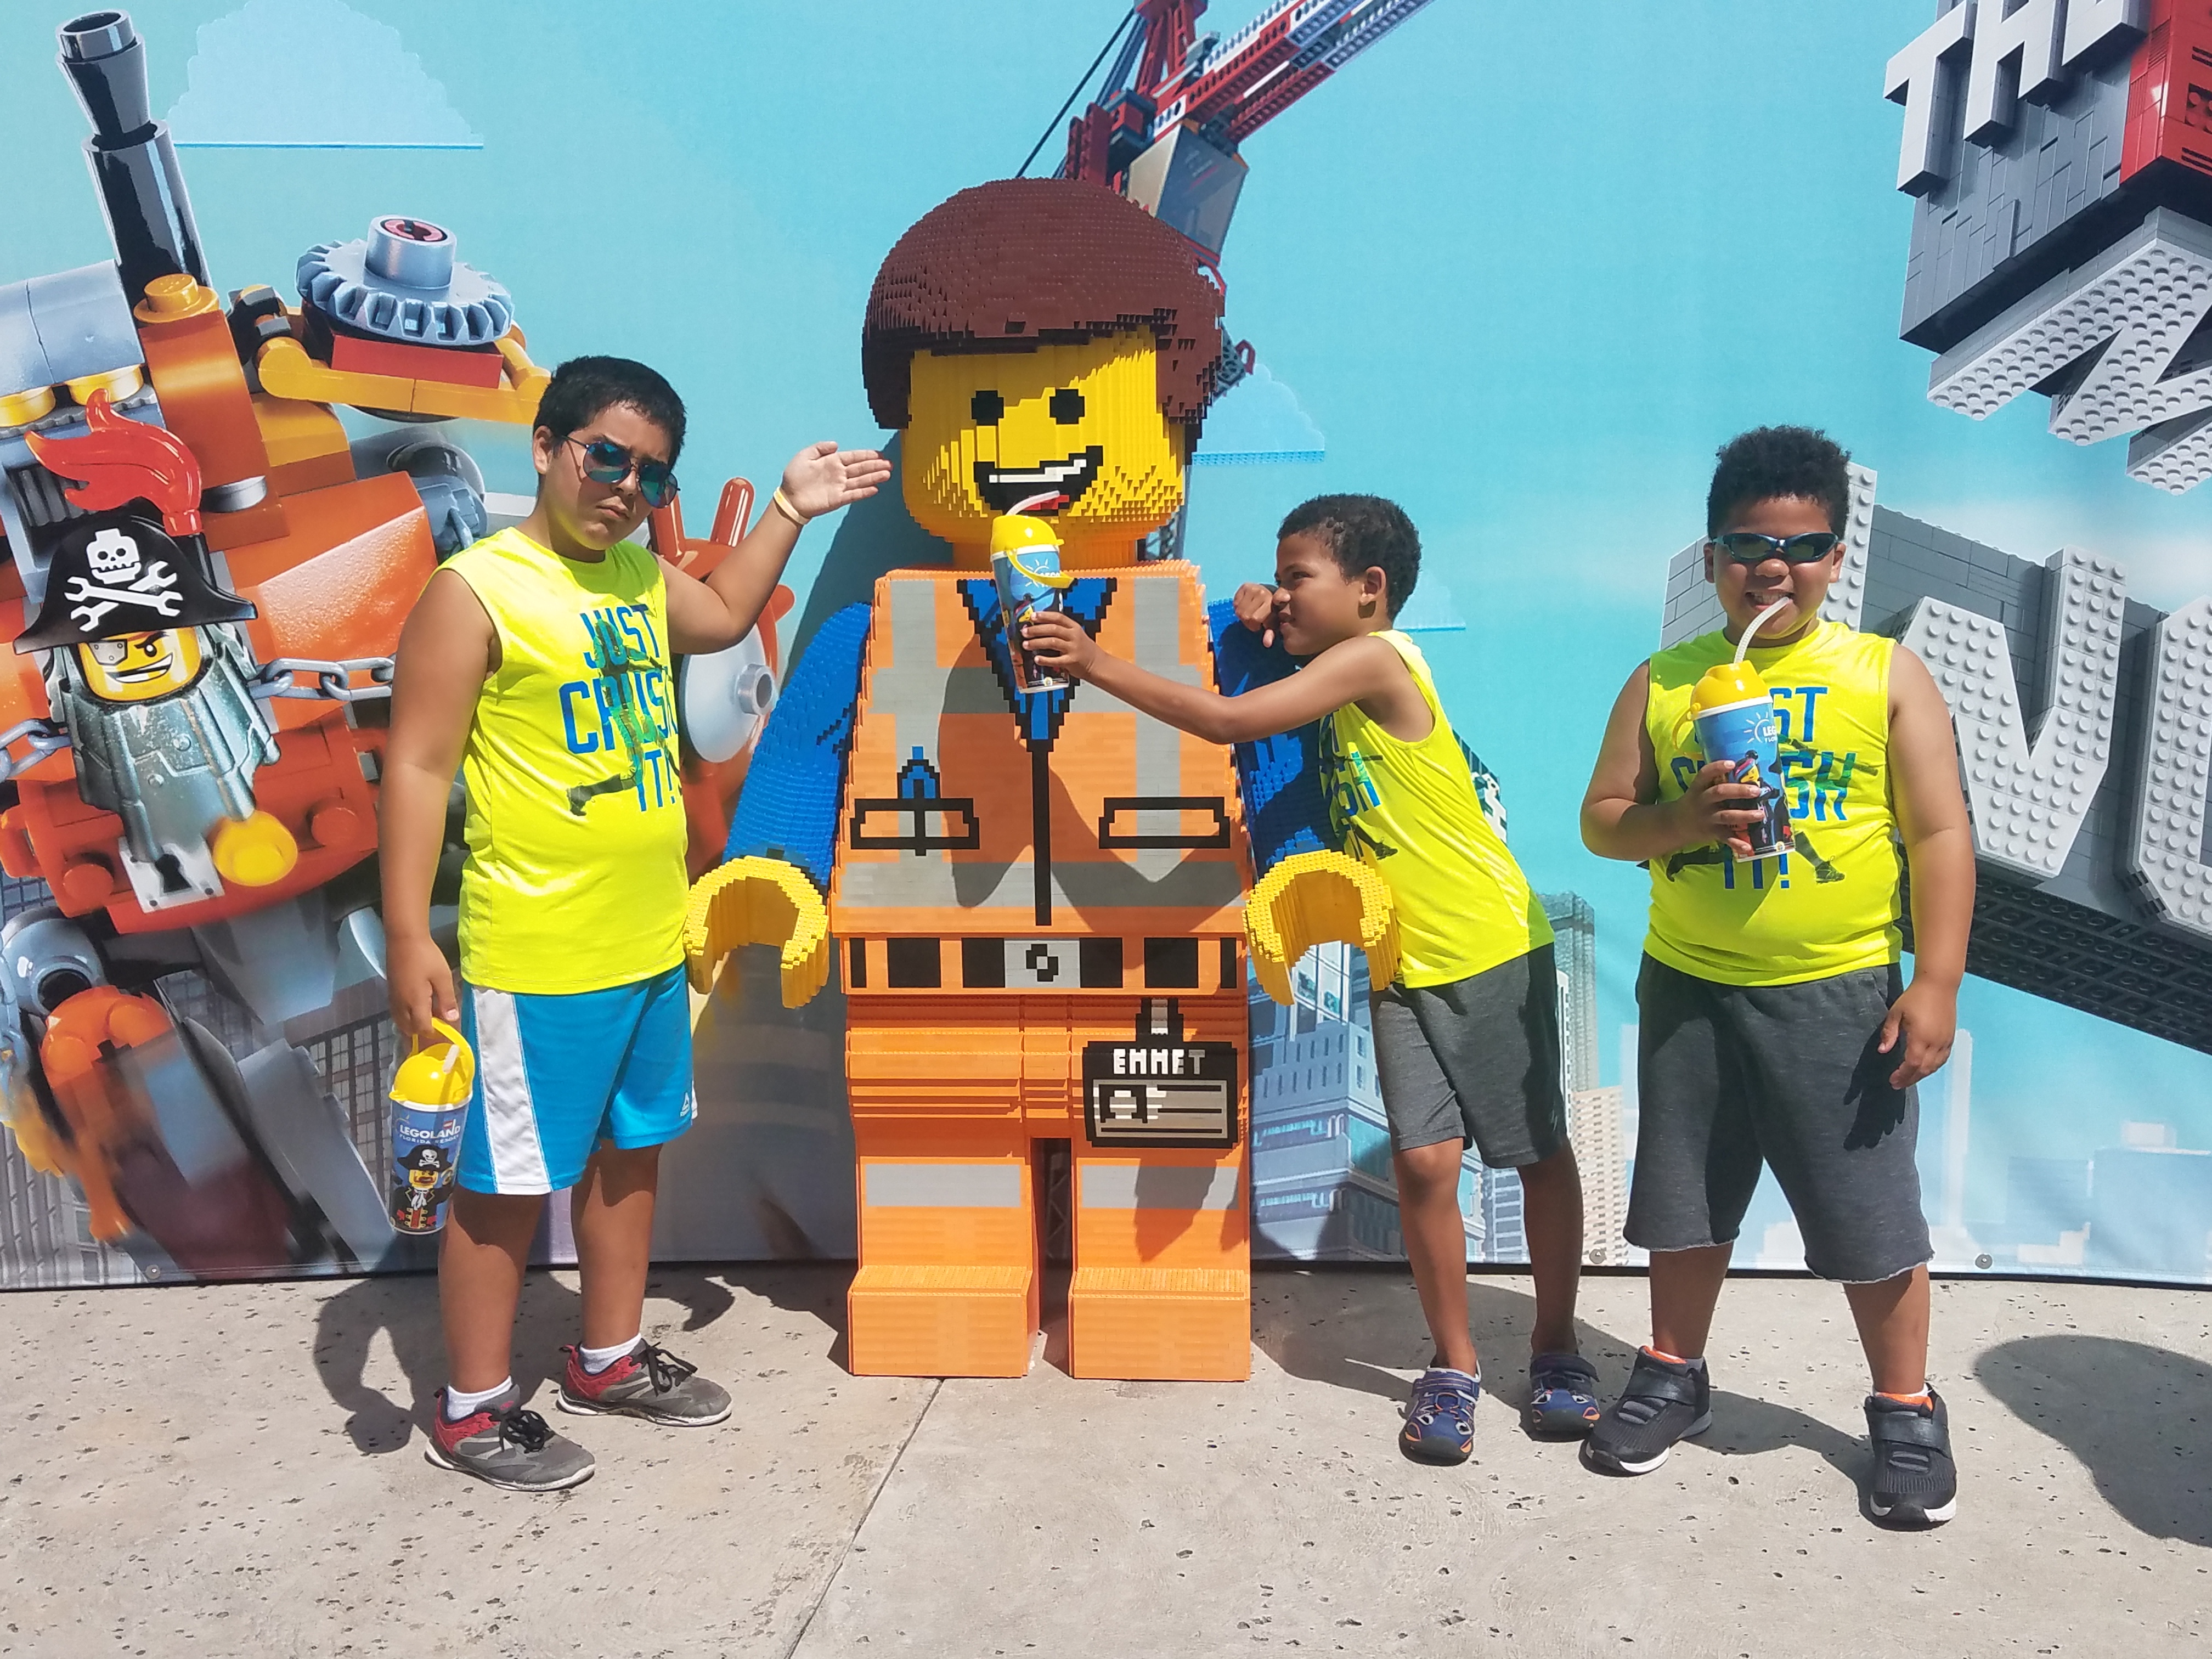 Children posing with a LEGOLAND character